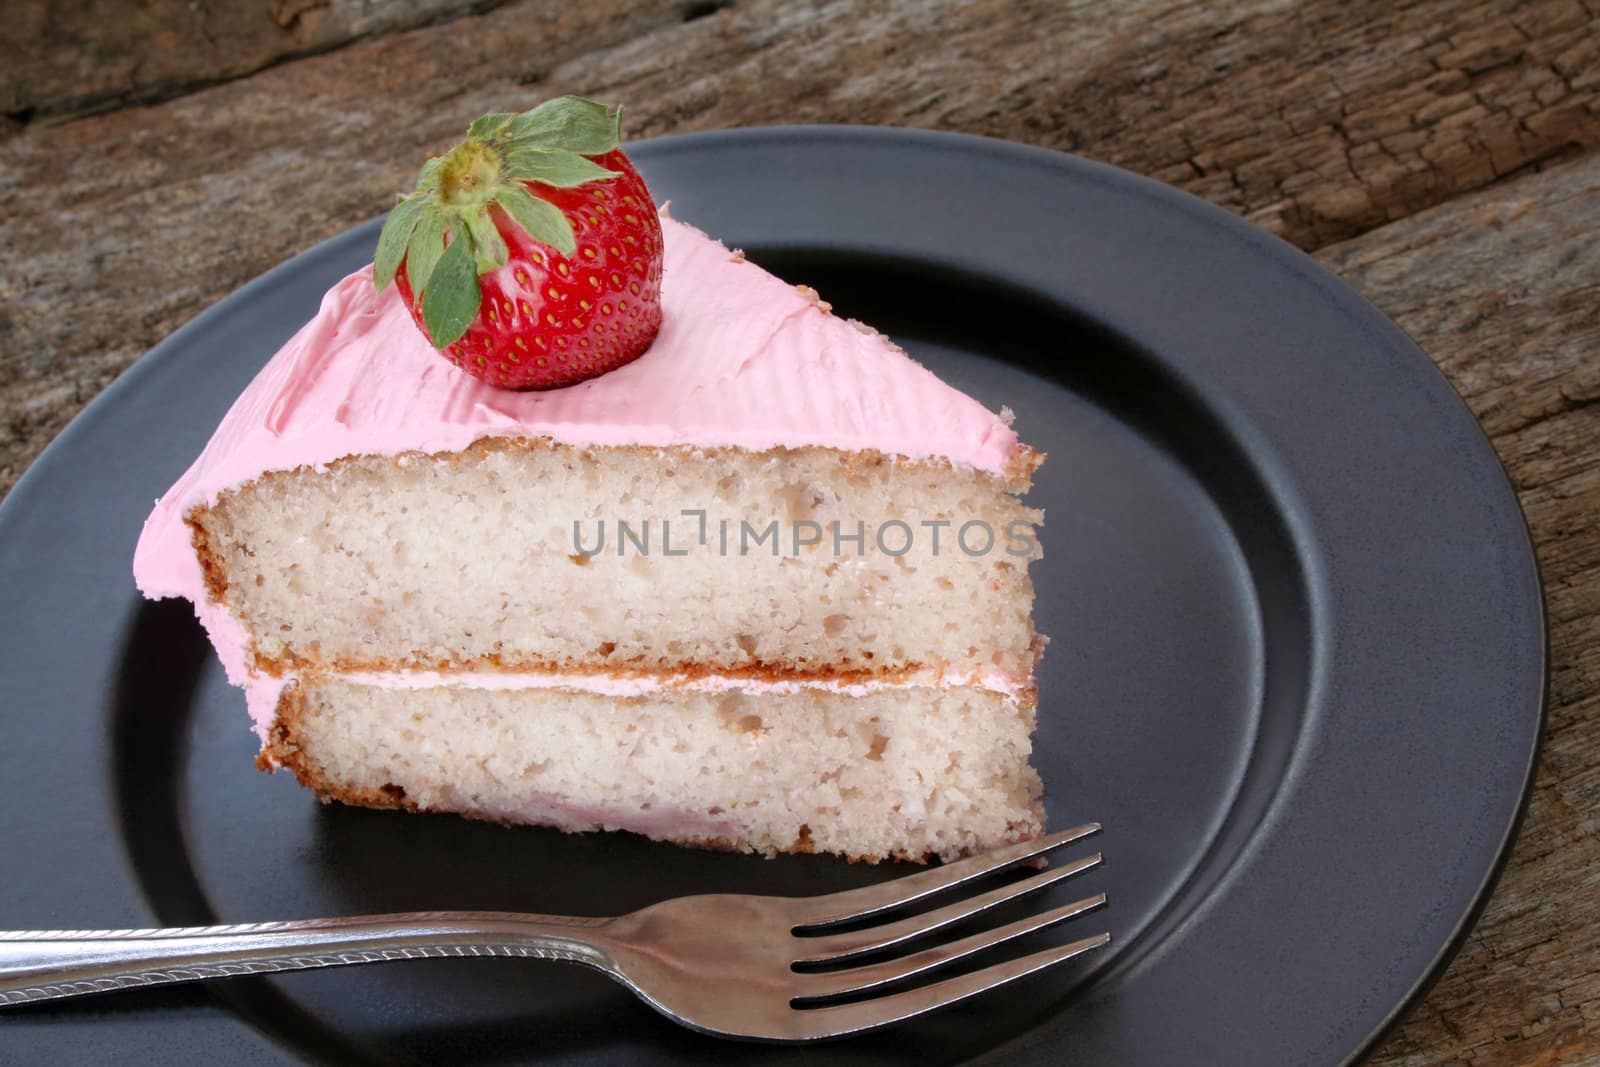 Strawberry cake with strawberry icing and garnished with a fresh strawberry.